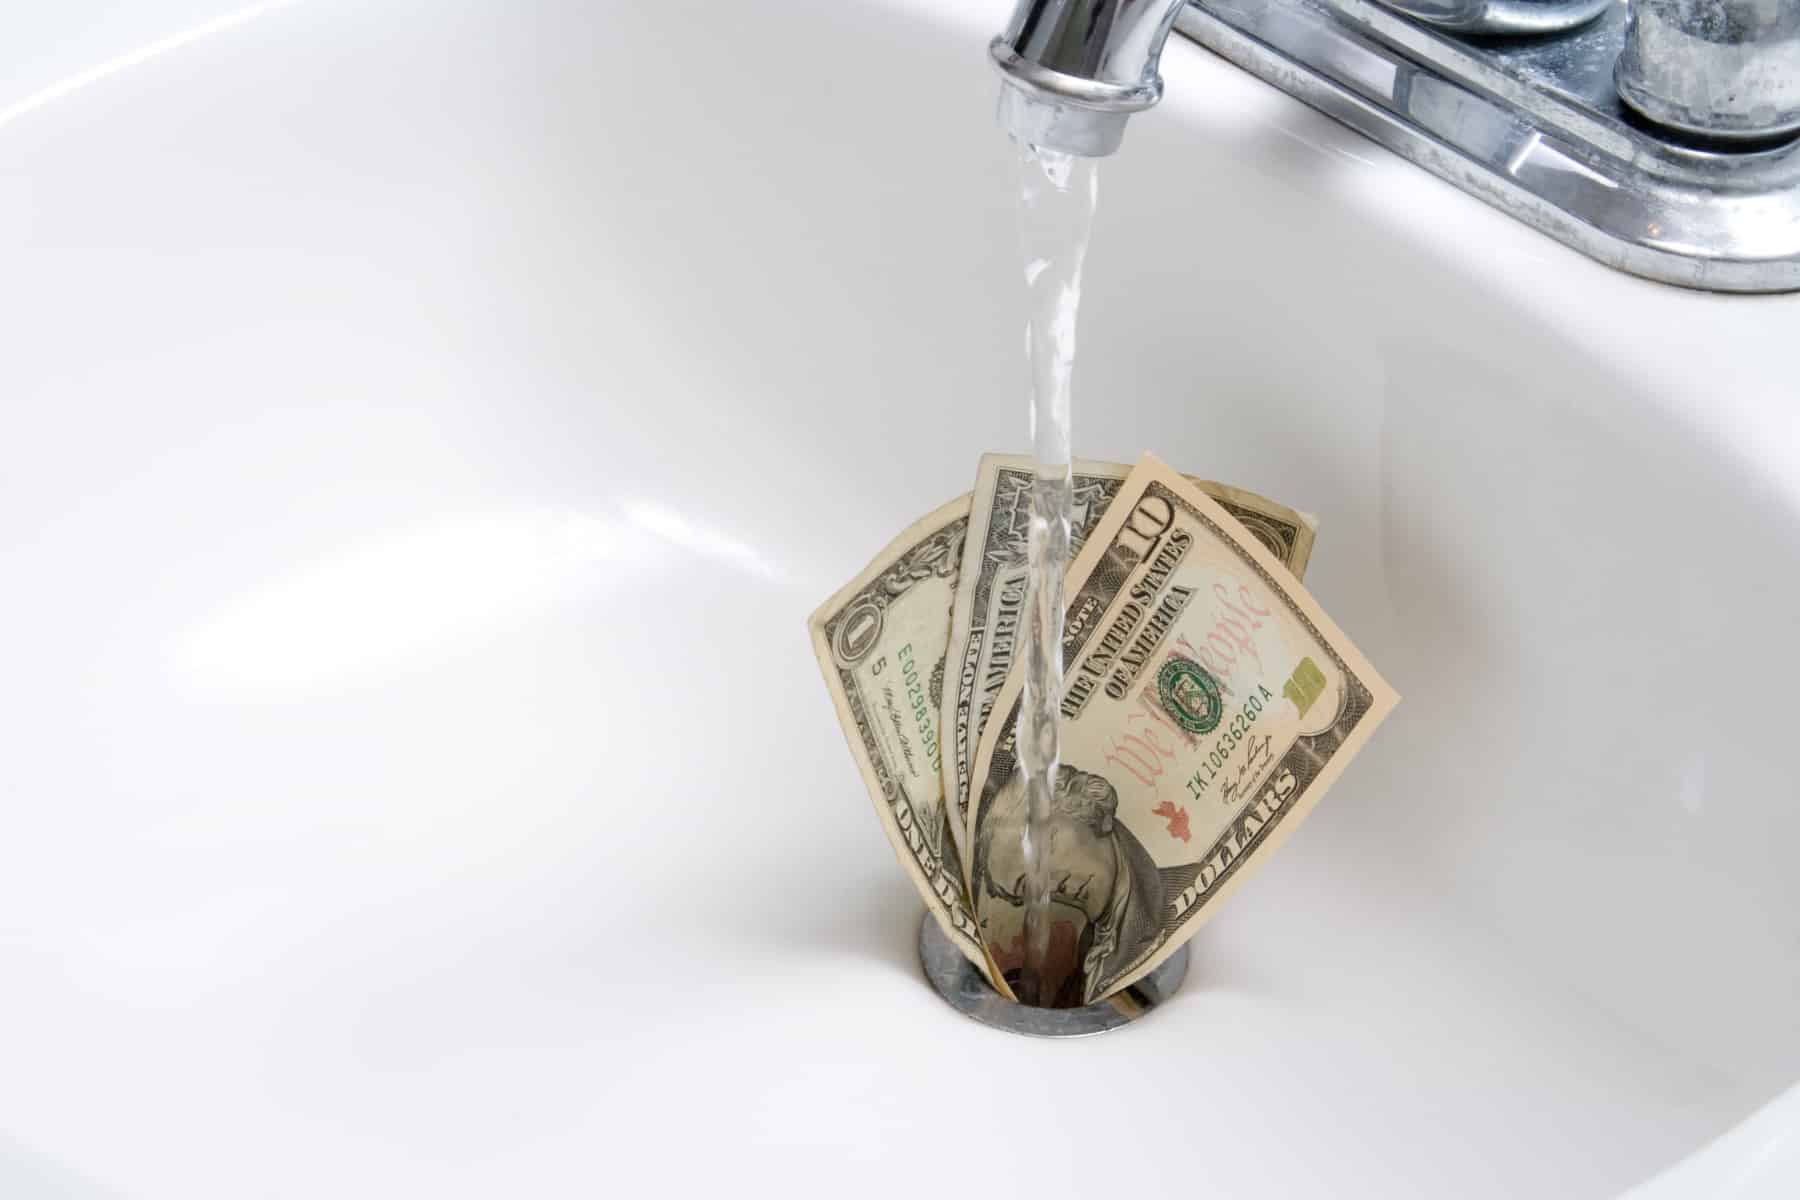 Is your property wasting Money? Learn how purchase orders can prevent money from going down the drain.